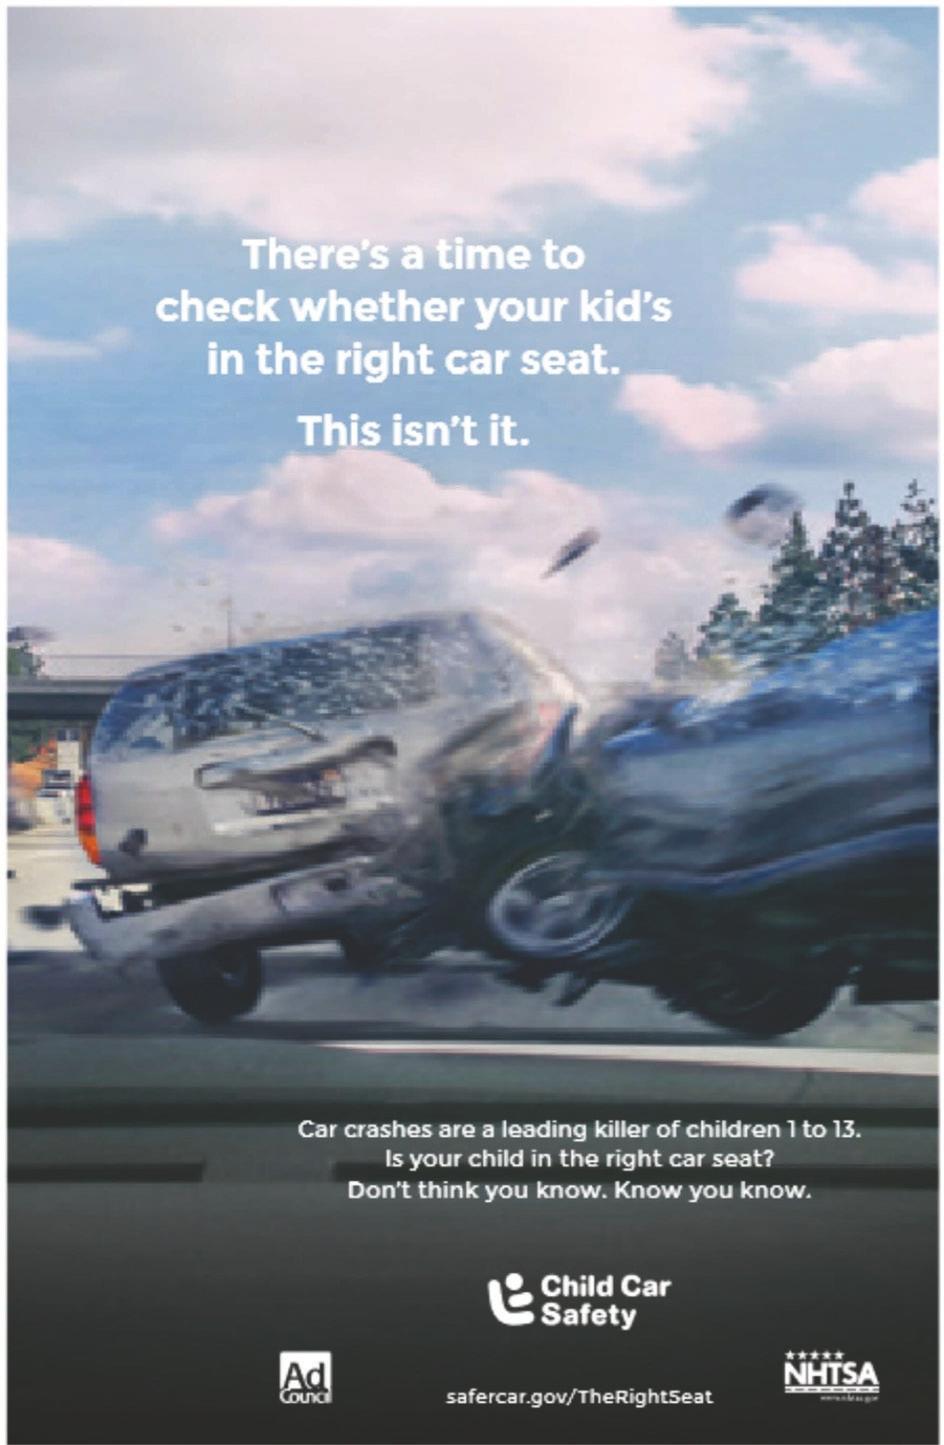 Two cars colliding at high speed. There's a time to check whether your kid's in the right car seat. This isn't it. Car crashes are a leading killer of children 1 to 13. Is your child in the right car seat? Don't think you know. Know you know. Child Car Safety logo. Ad Council logo. NHTSA logo. safercar.gov/TheRightSeat